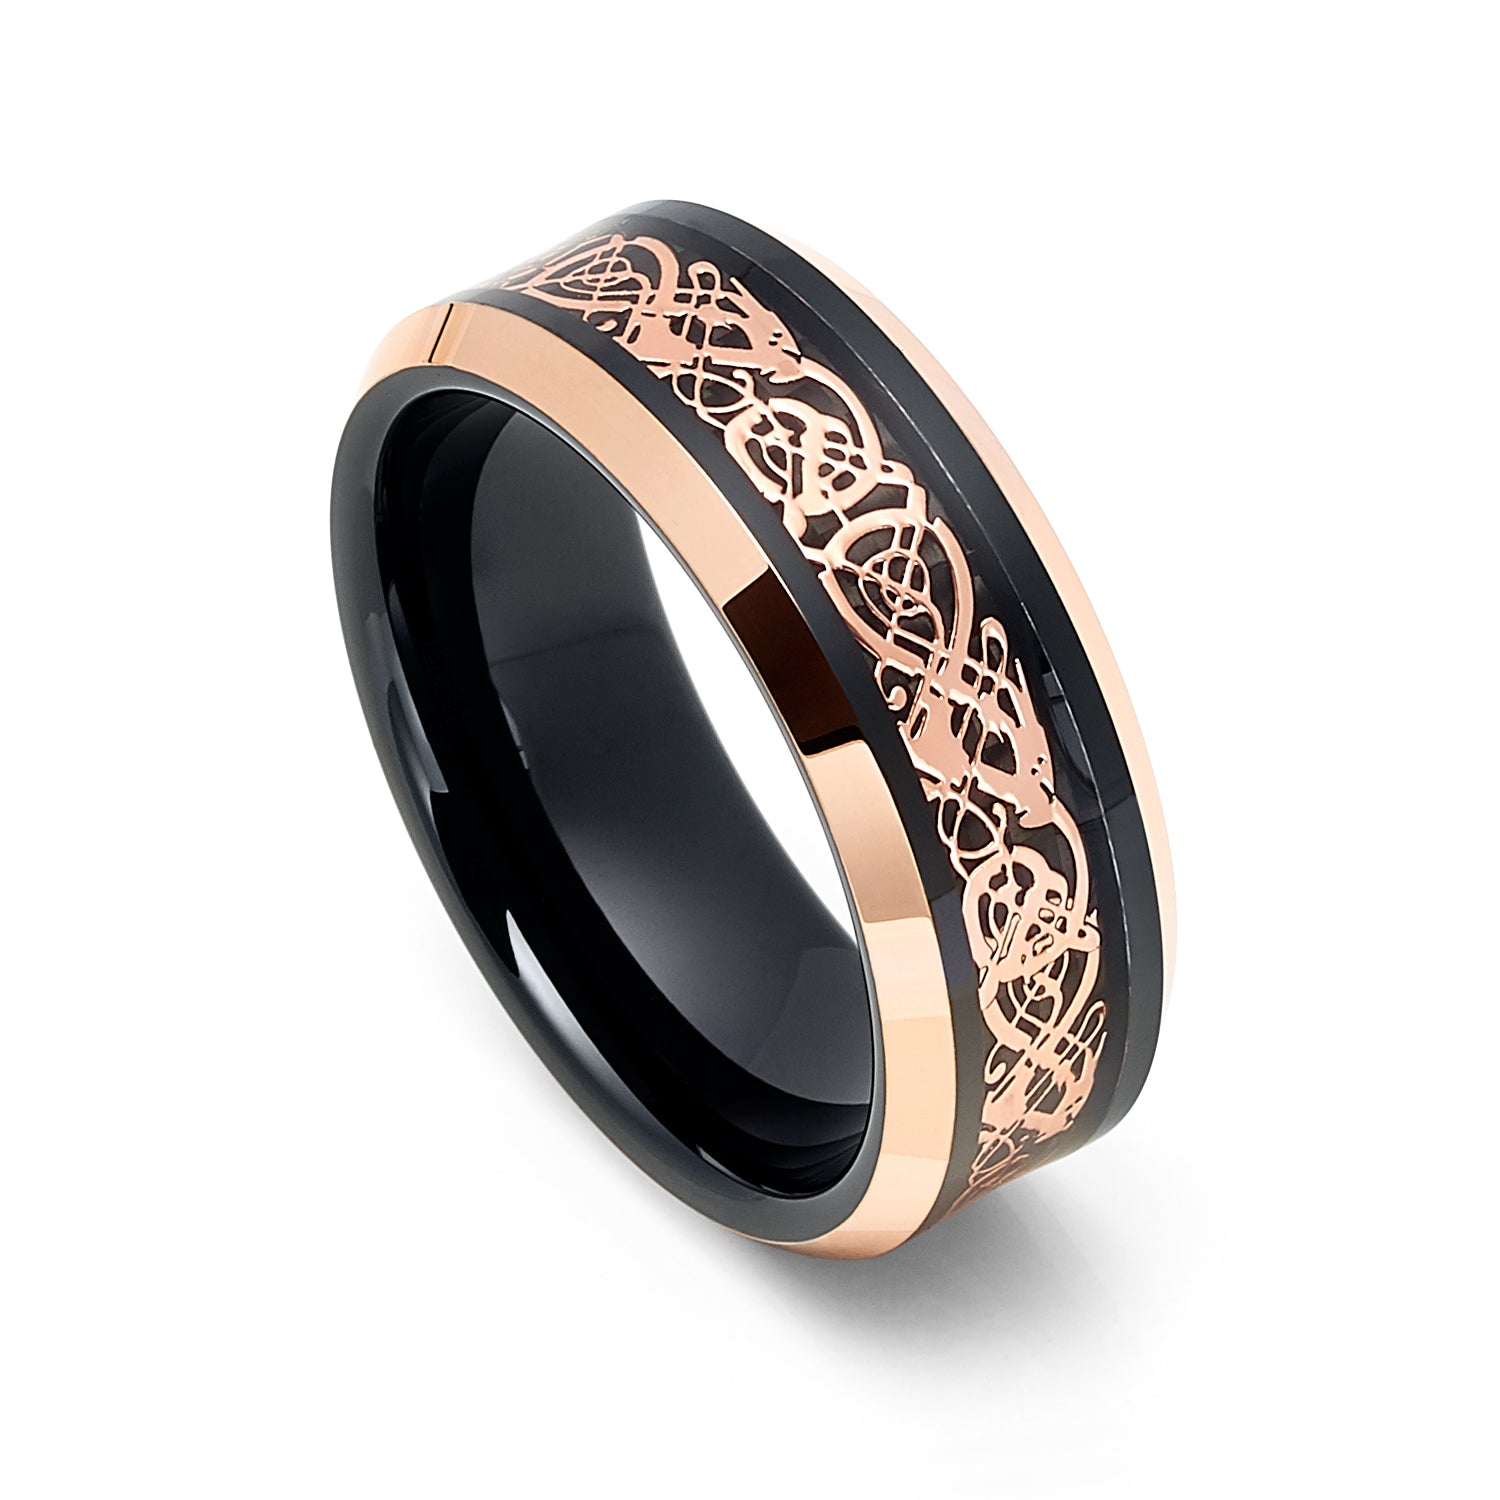 Tungsten Carbide Wedding Ring with 18K Rose Gold Dragon Inlay, 8mm ...